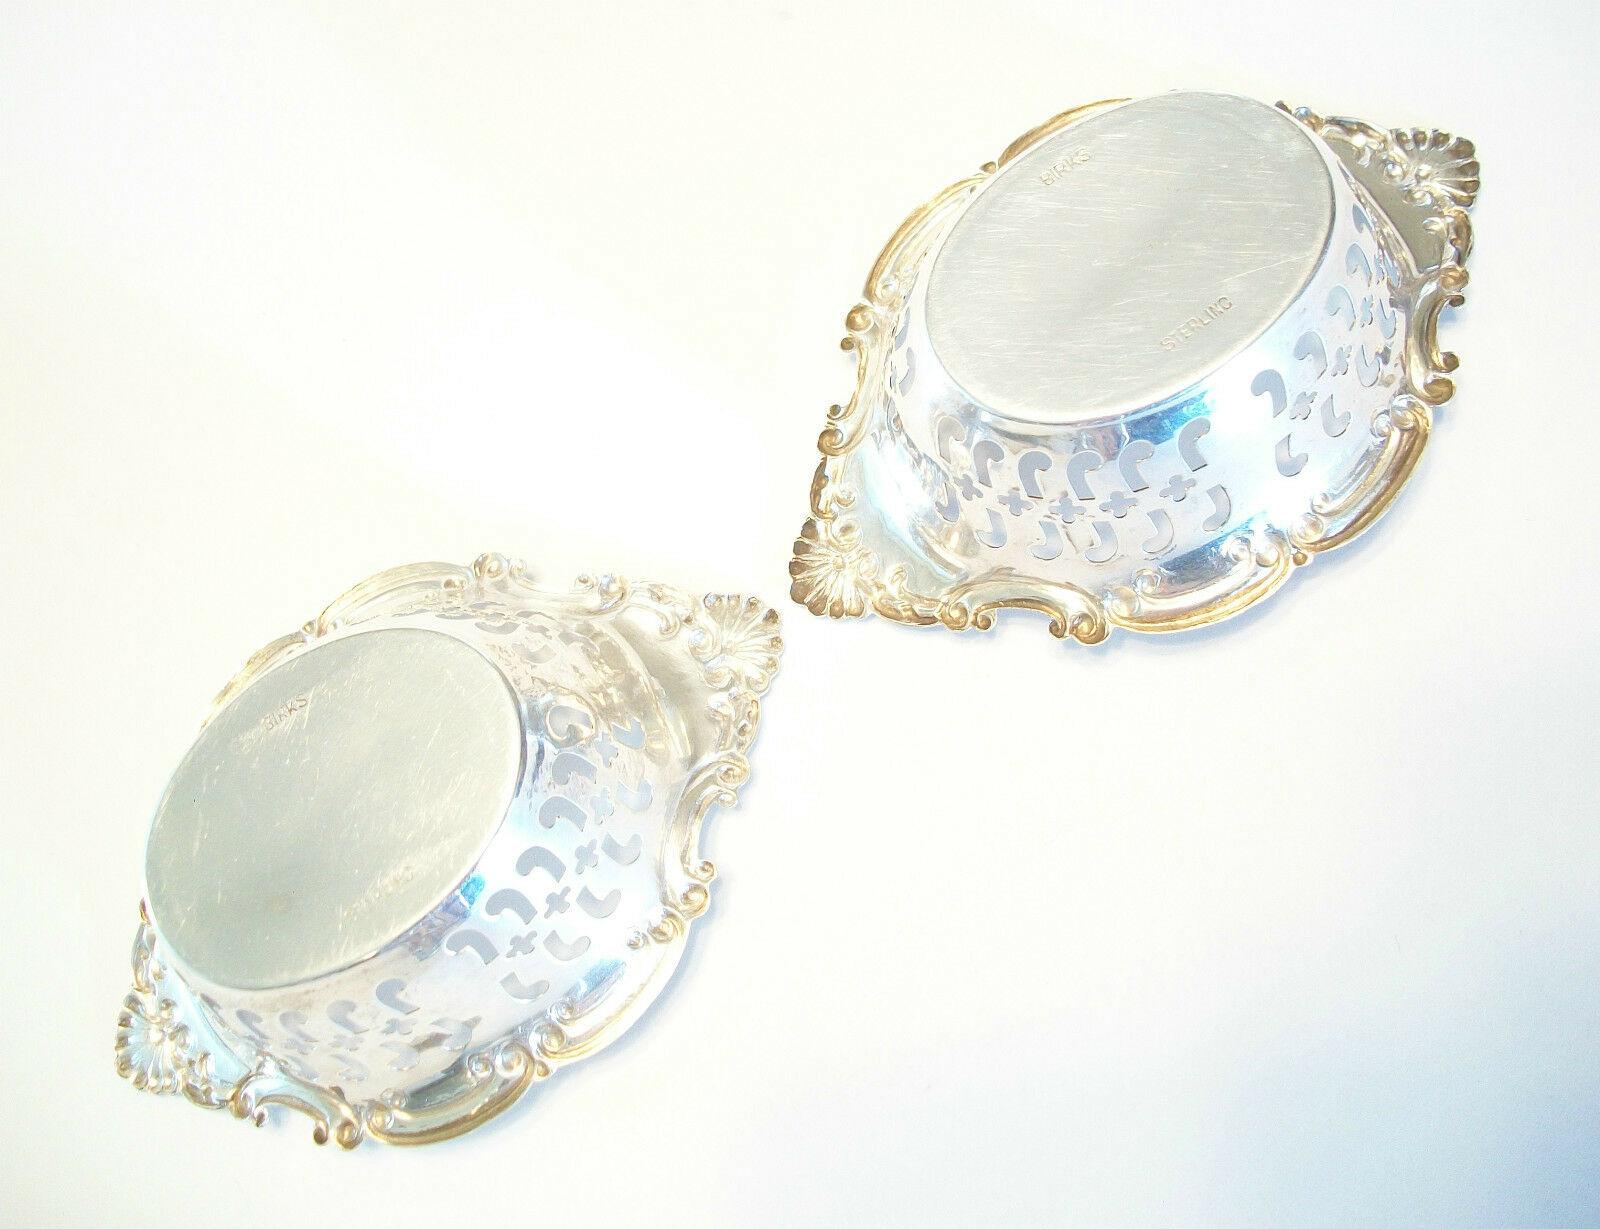 BIRKS - Pair of Pierced Sterling Silver Candy Dishes - Canada - Mid 20th Century In Good Condition For Sale In Chatham, ON